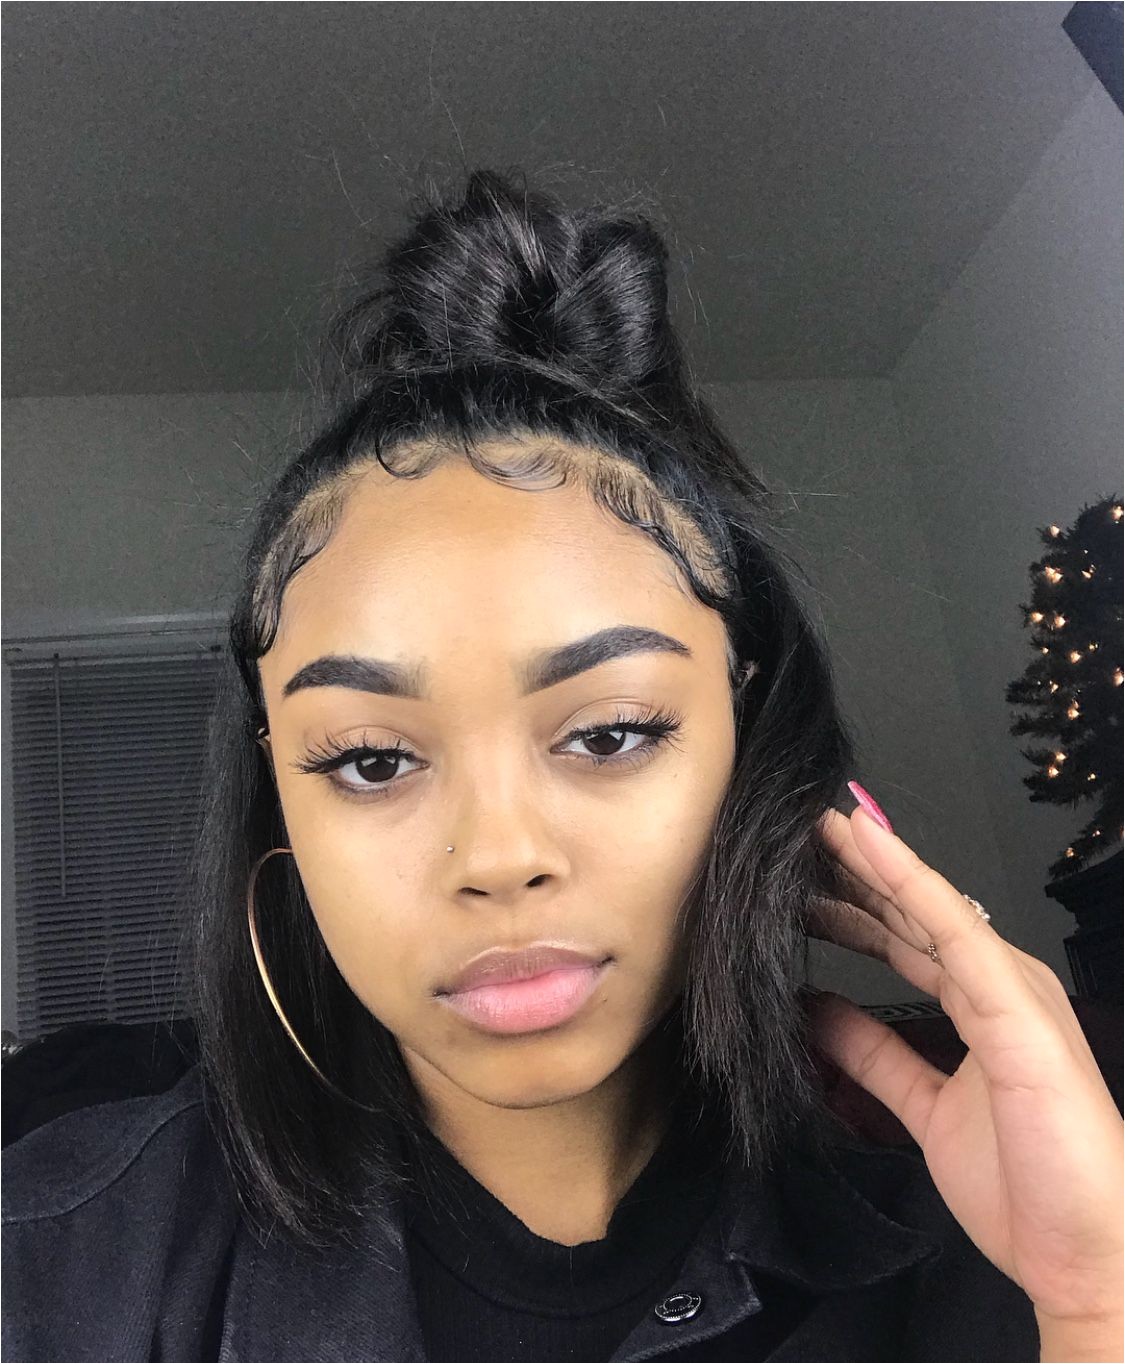 Sweet 16 Hairstyles for Black Girls Pin by L E E N A A On thehair Pinterest